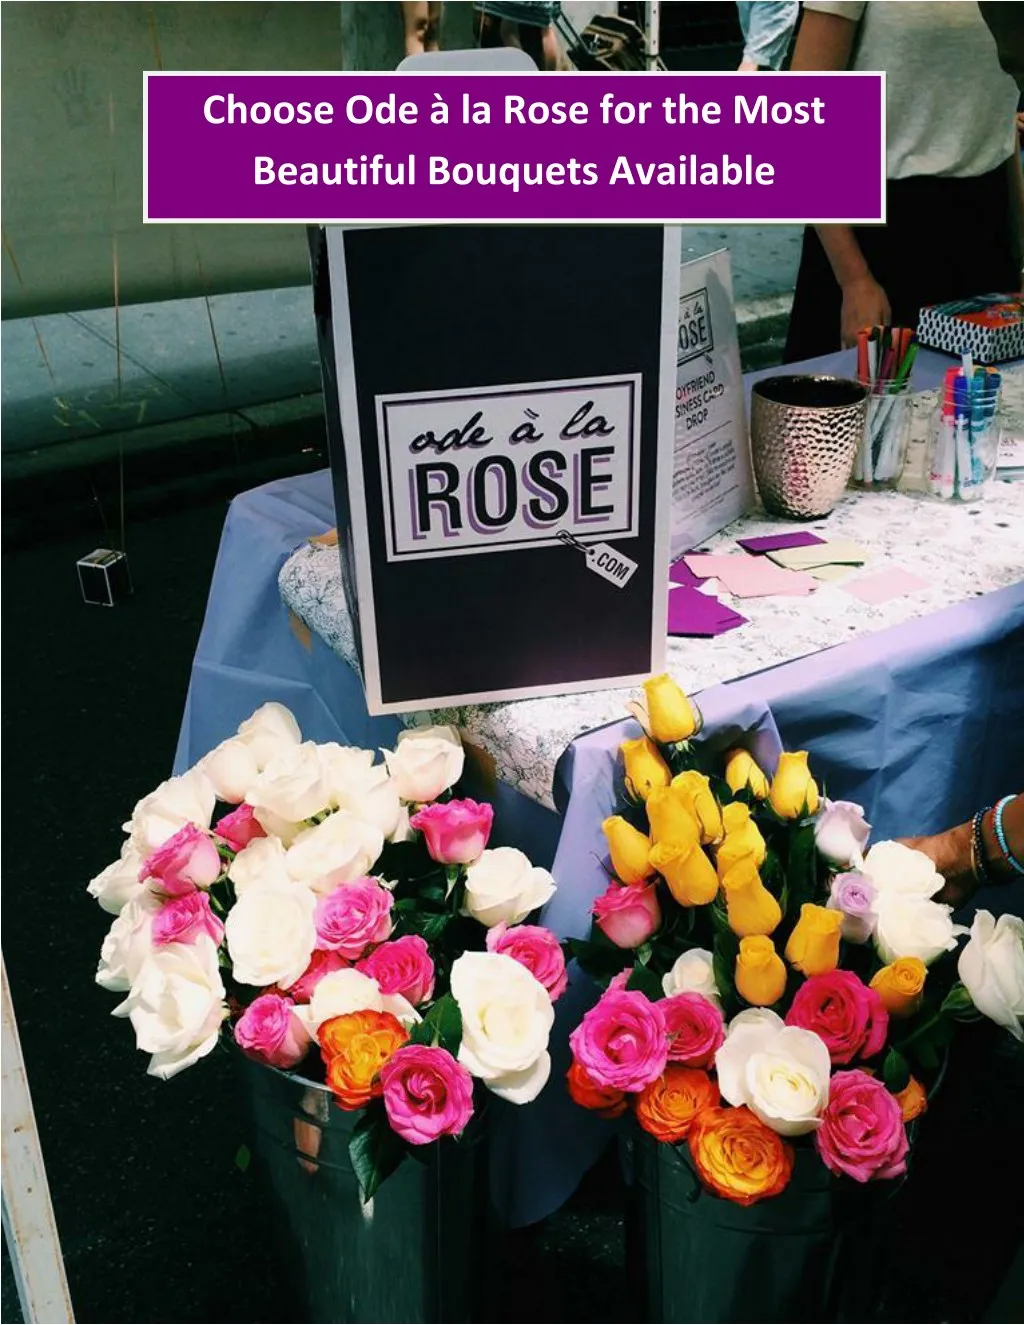 choose ode la rose for the most beautiful